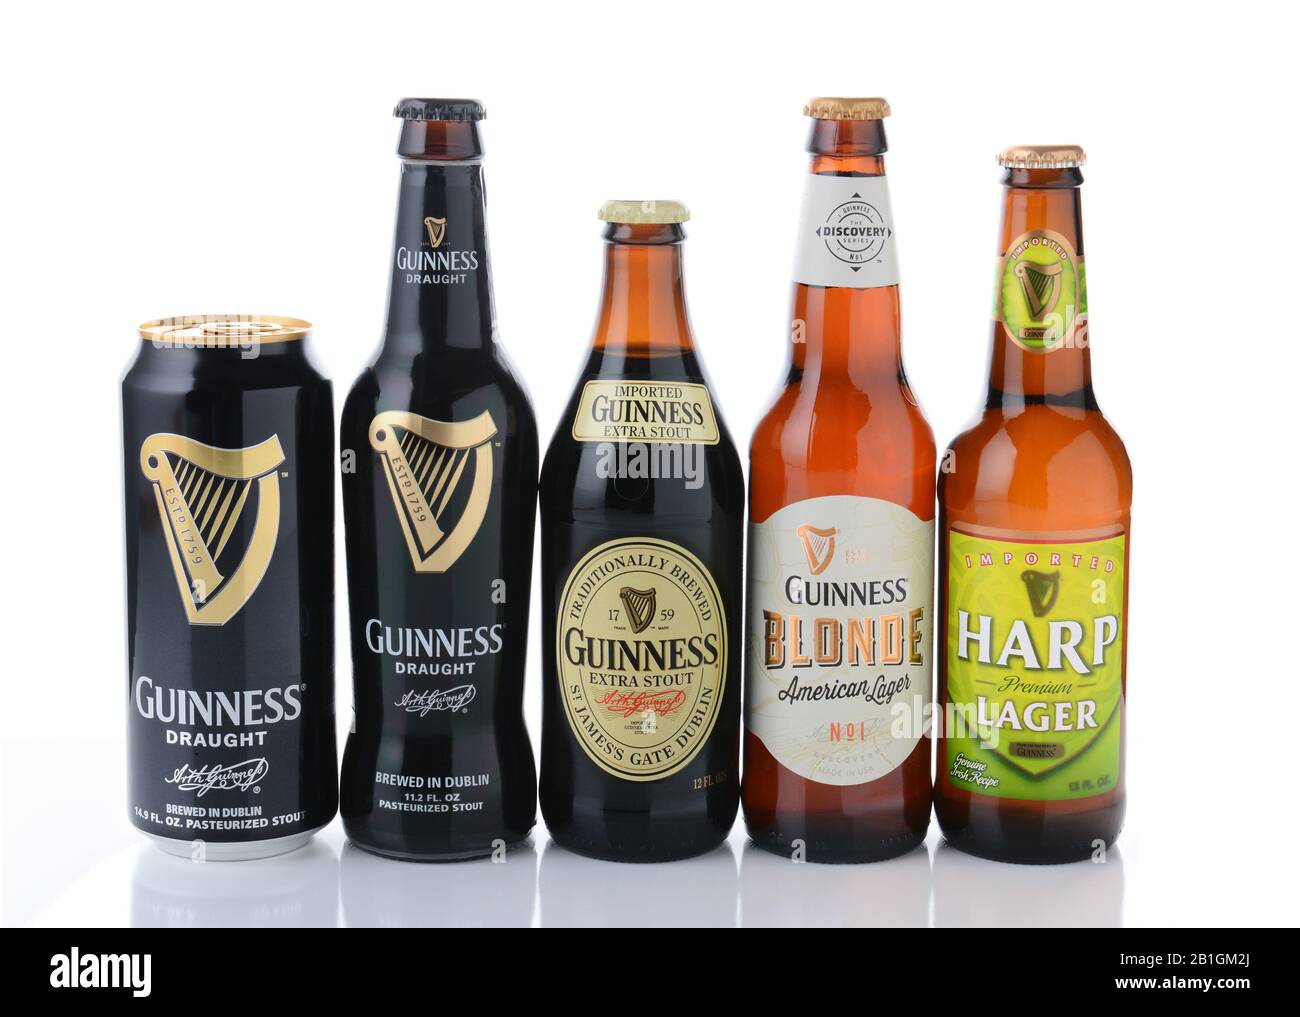 IRVINE, CA - JANUARY, 11, 2015: Five bottles of beer from the Guinness Brewing Company.  Guinness has been producing beer in Ireland since 1759. Stock Photo